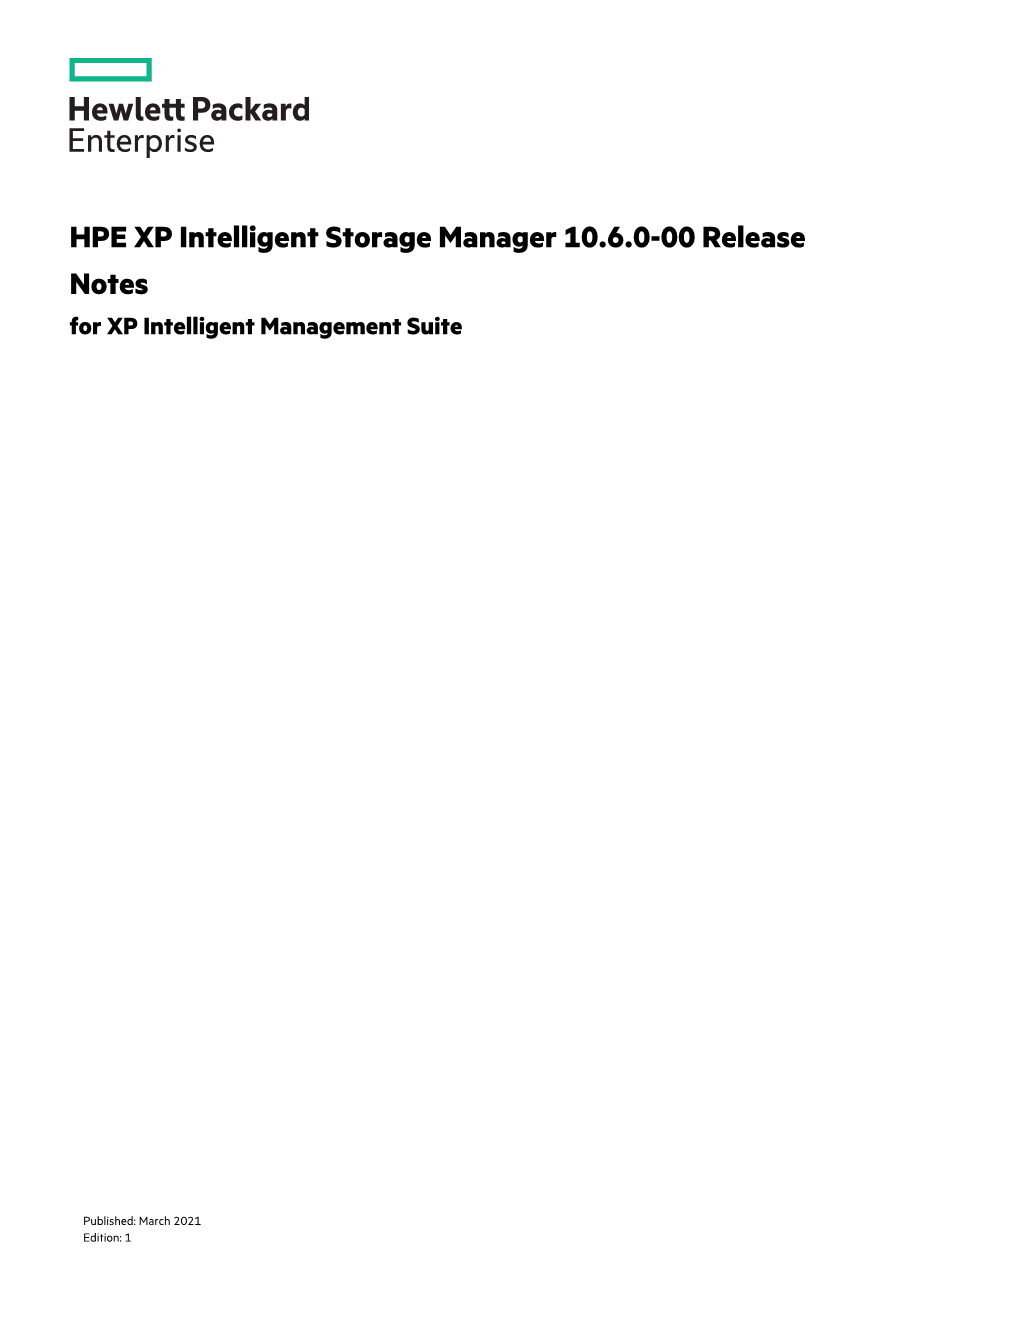 HPE XP Intelligent Storage Manager 10.6.0-00 Release Notes for XP Intelligent Management Suite